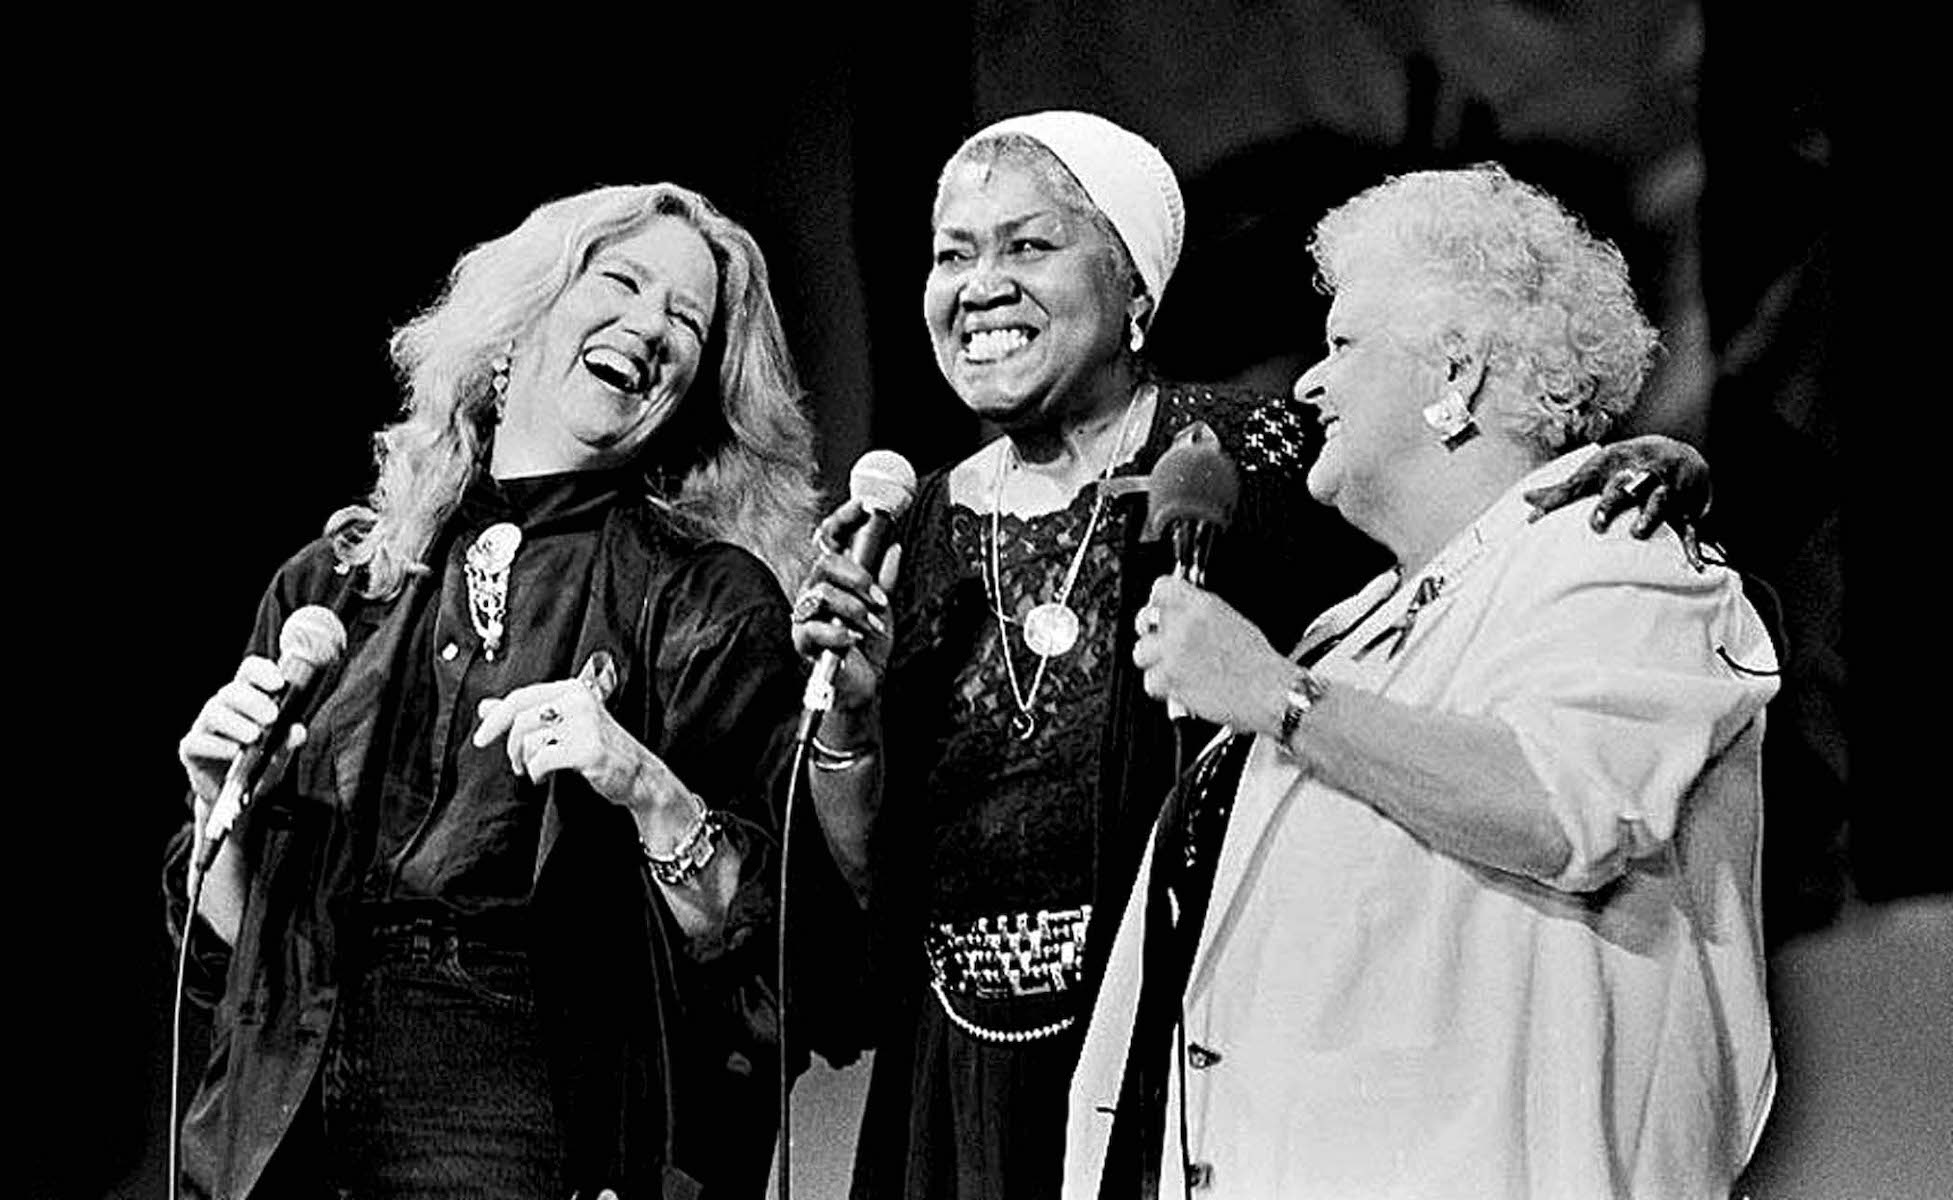 Holly Near, Odetta, and Ronnie Gilbert performing at the Redwood Music Festival, 1992. Photo Credit: J.A. Rubino. Photo courtesy of Holly Near.